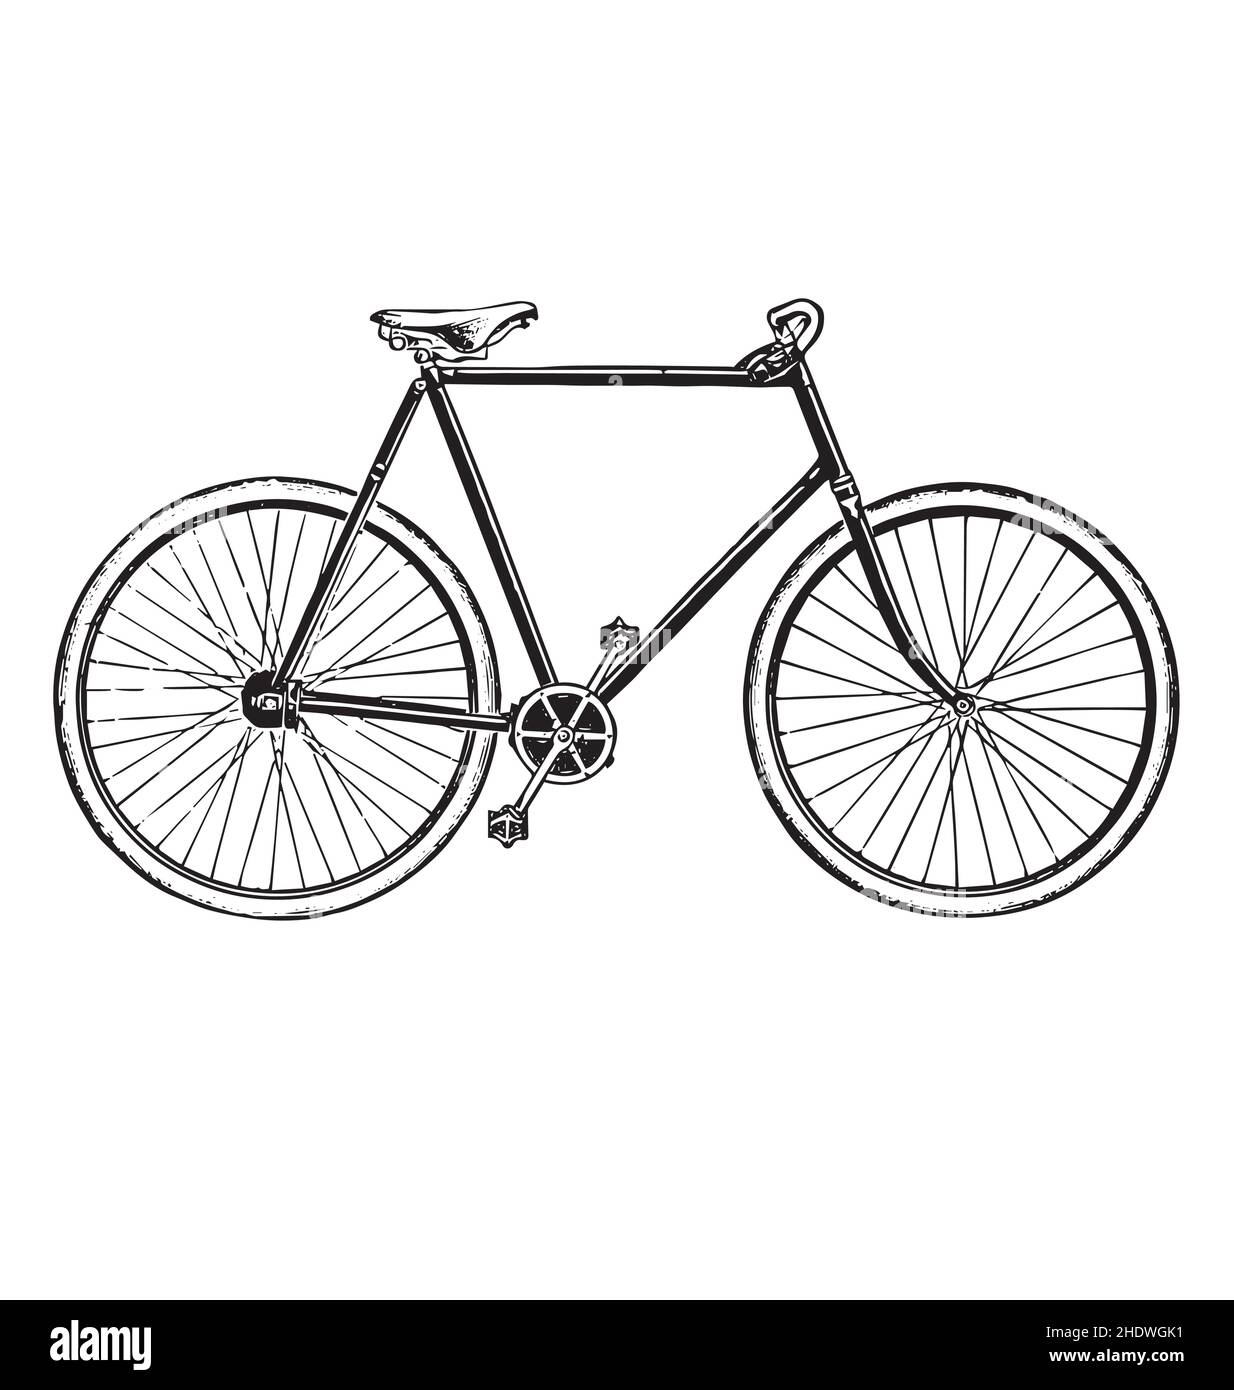 Vintage Retro Bike Bicycle Black Ink Etching Side View Isolated On White Background Stock Vector